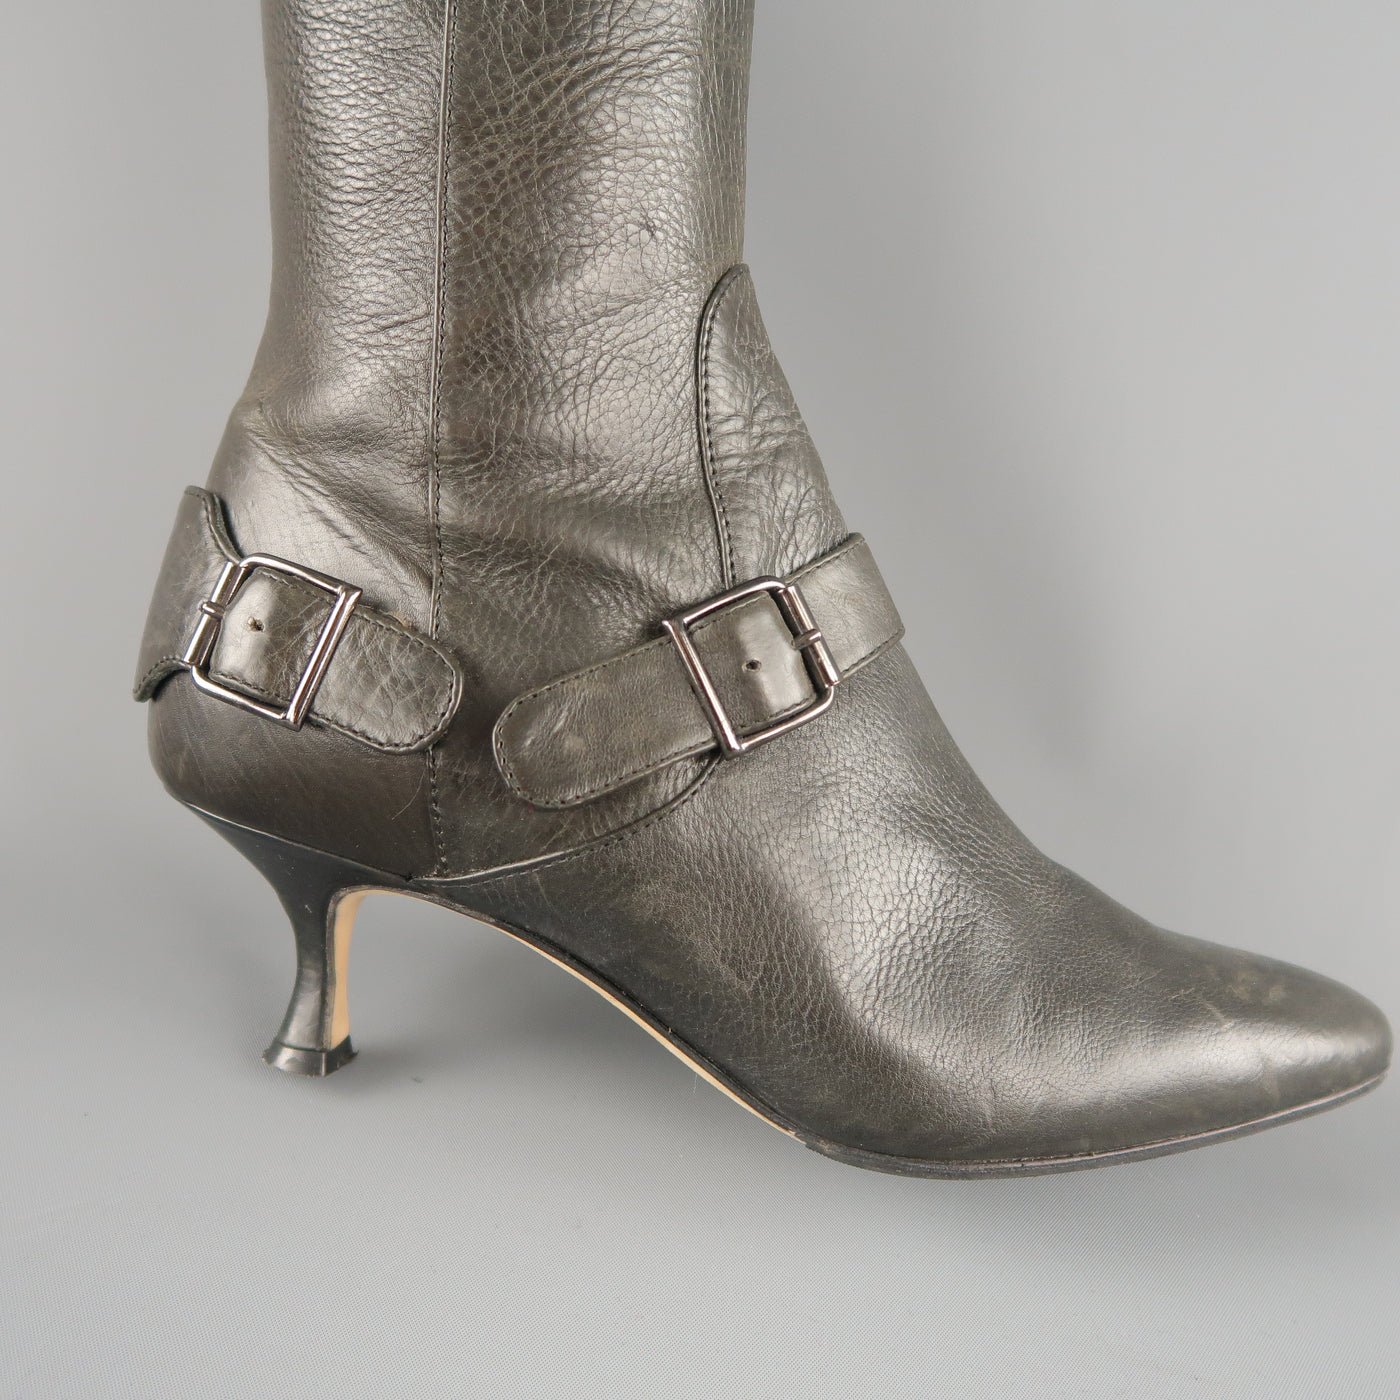 MANOLO BLAHNIK Size 6.5 Slate Gray Leather Pointed Knee High Boots